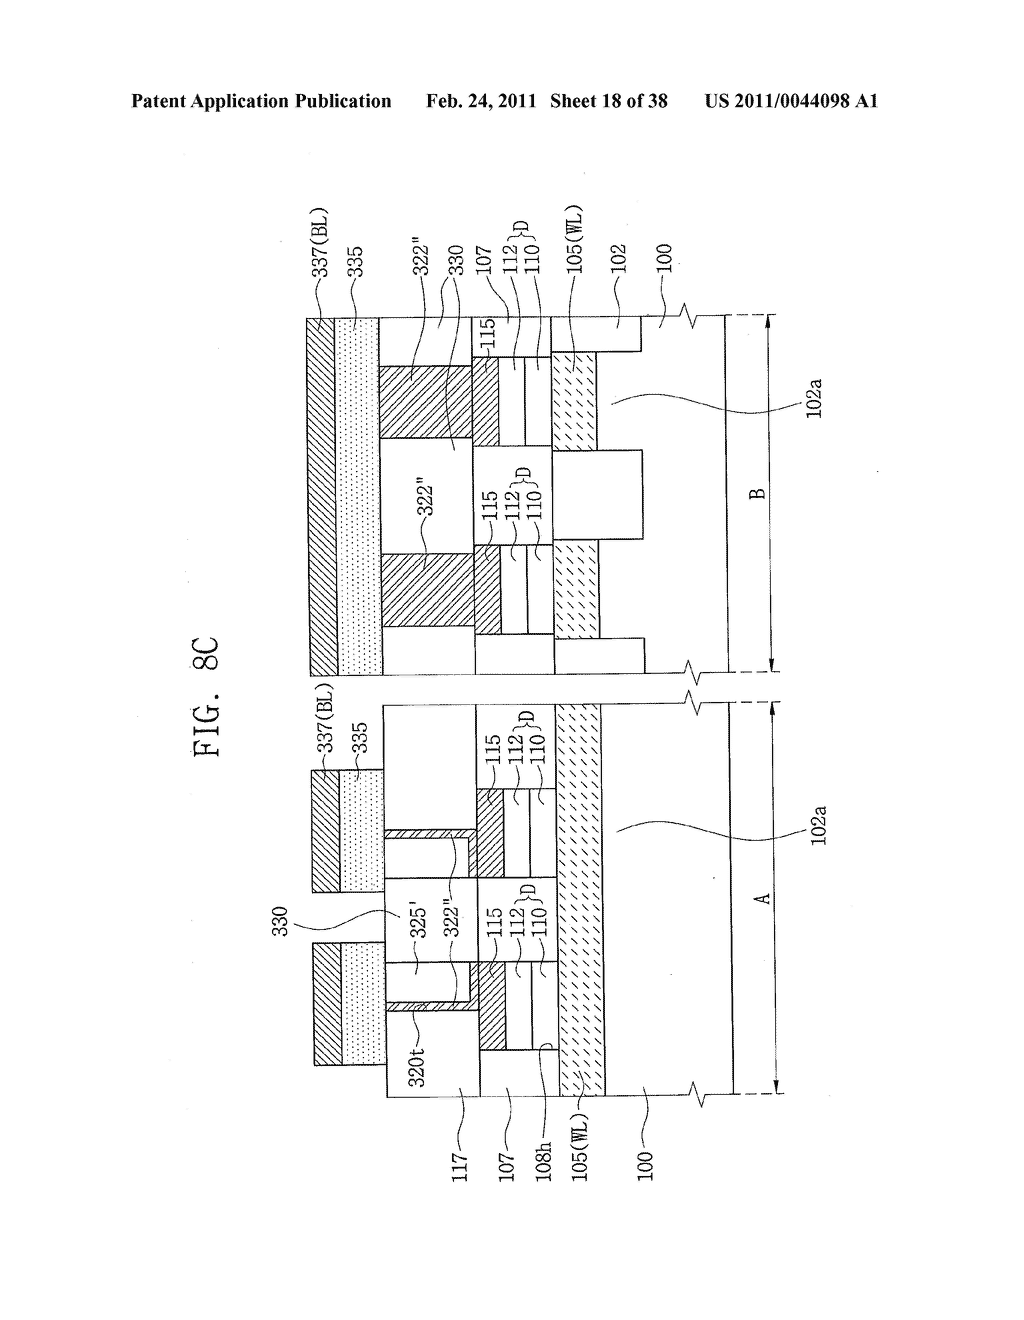 Nonvolatile Memory Cells Having Phase Changeable Patterns Therein for Data Storage - diagram, schematic, and image 19